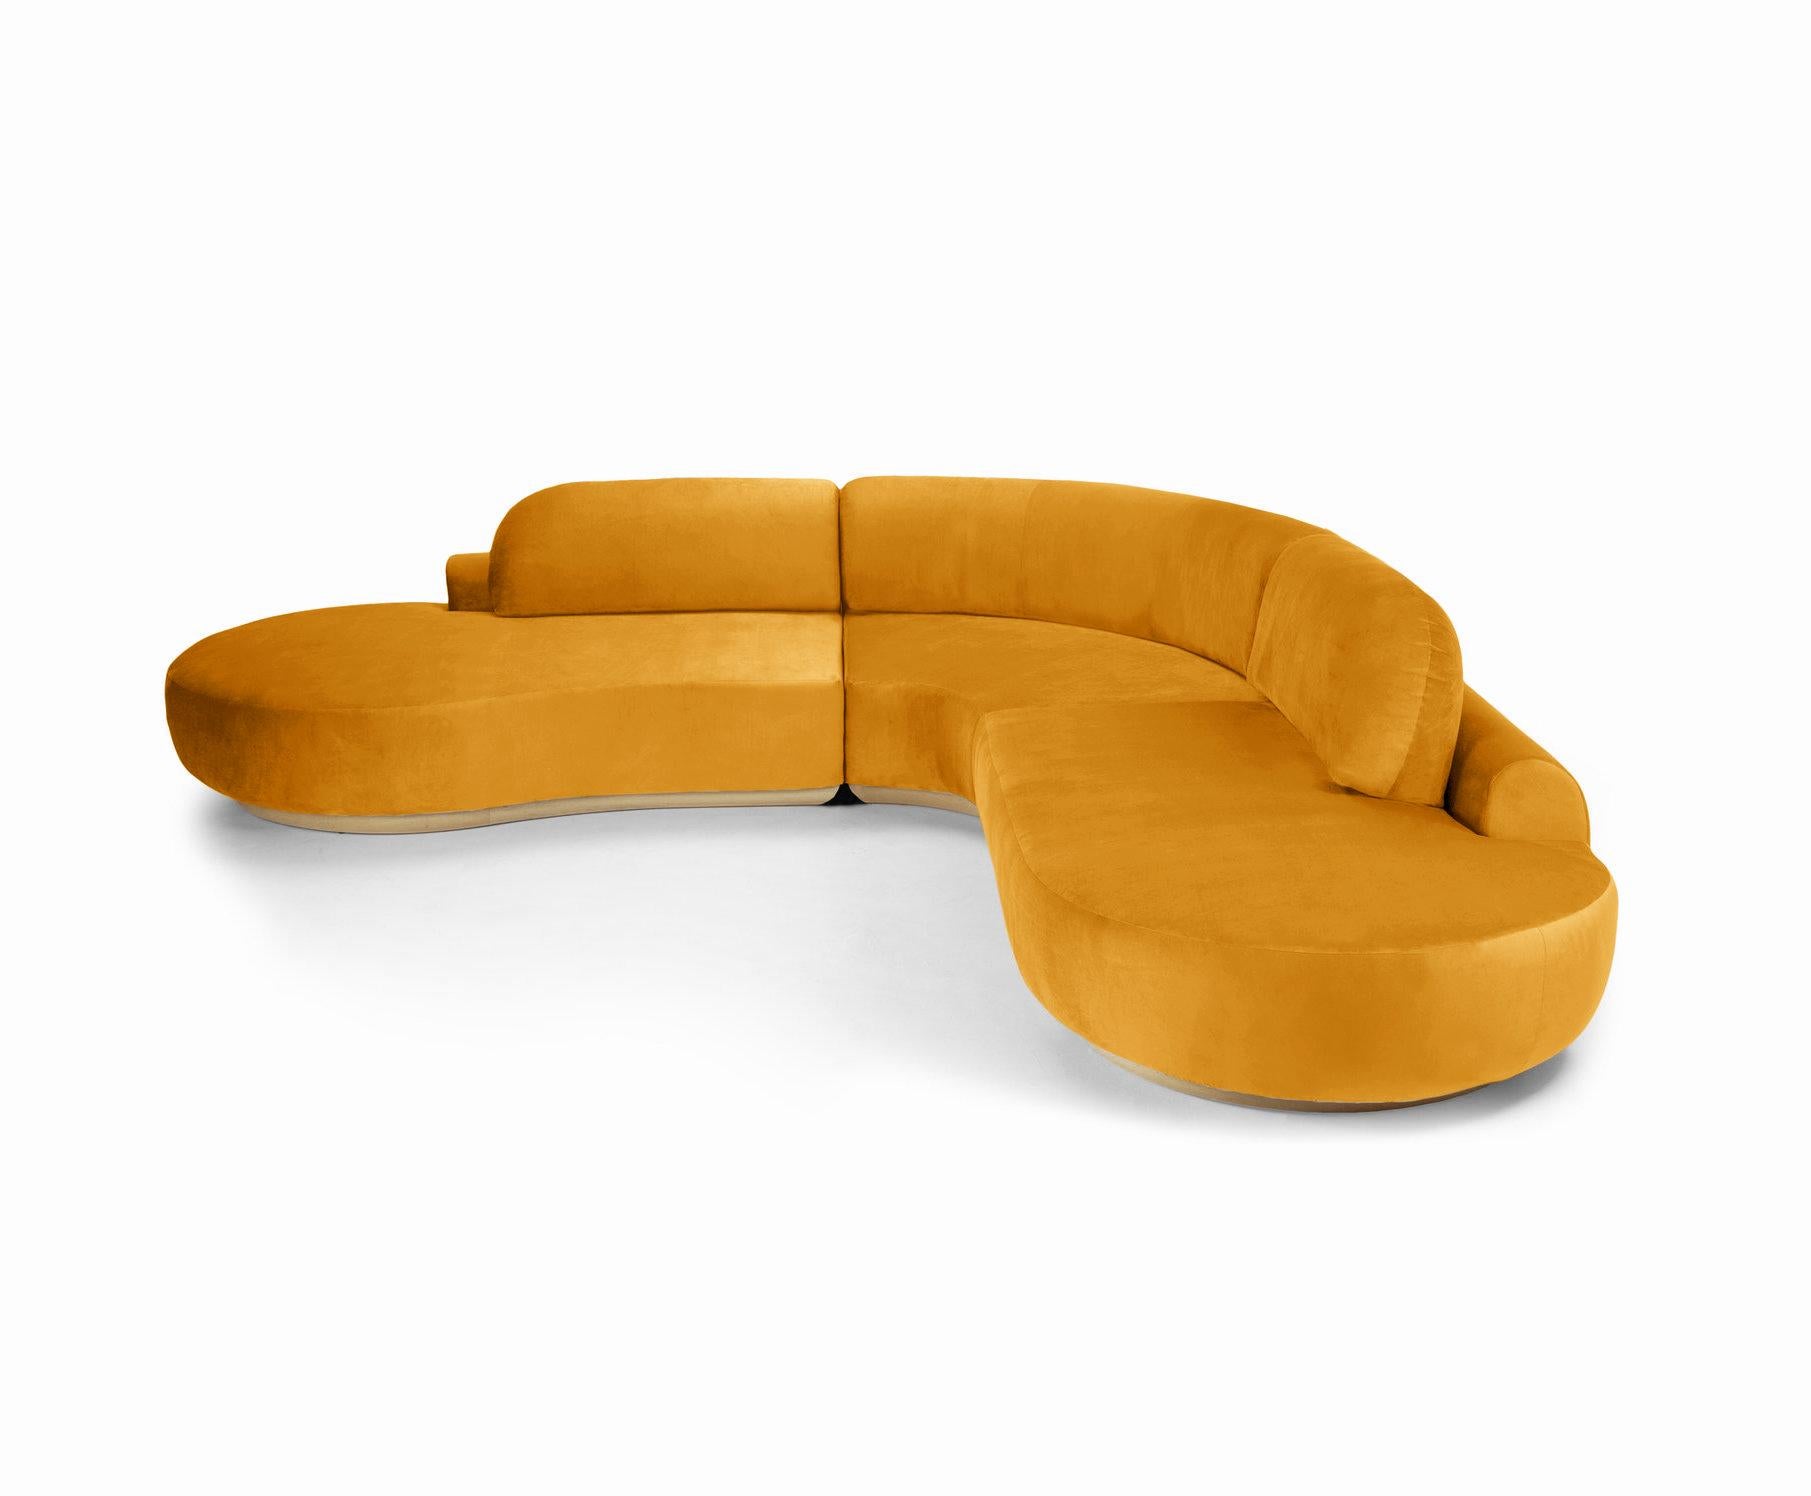 The Naked Sectional Sofa is a modular sofa with inviting curves and a comfortable seating. Handmade with a solid wood base. The Naked Sectional Sofa is available in a number of different materials, finishes and combinations.

Material

Top : velvet